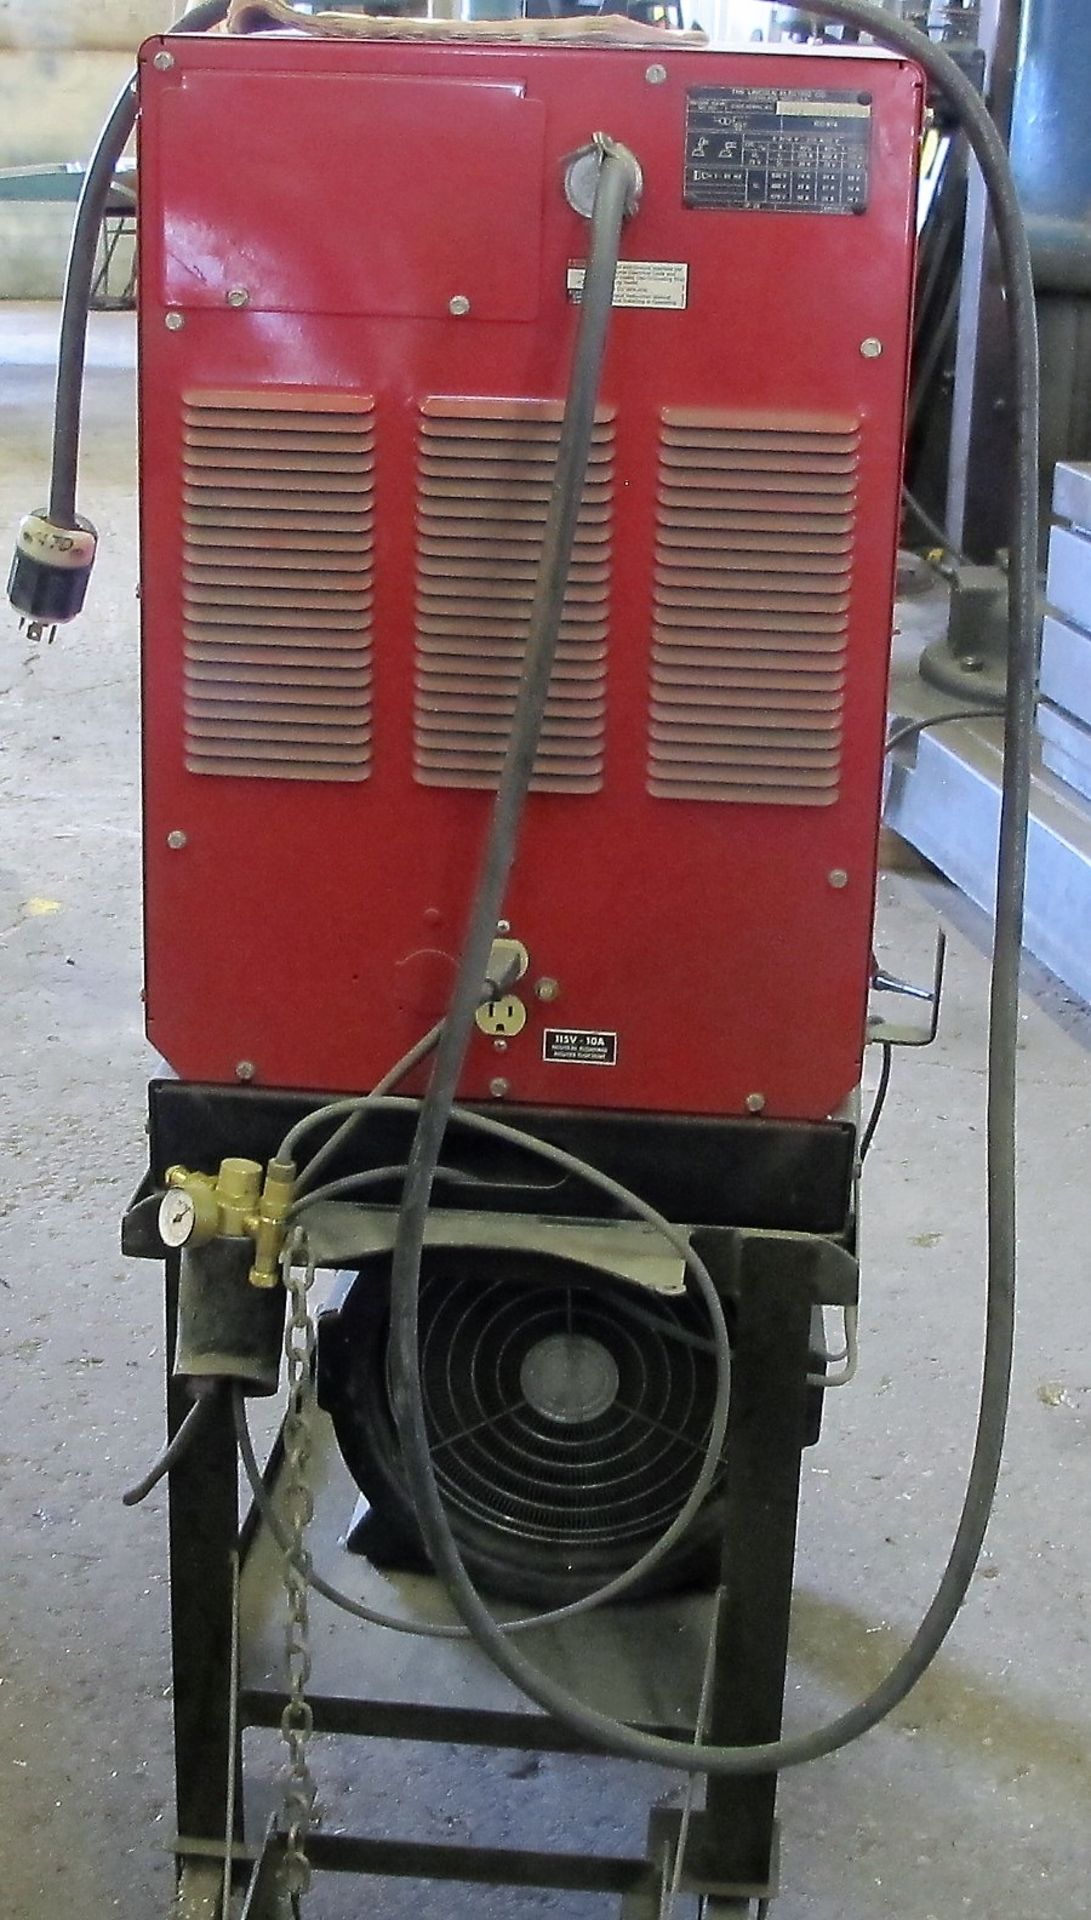 LINCOLN ELECTRIC SQUARE WAVE TIG 255 WELDER W/LA105939 COOLING SYSTEM, CART AND CABLES - Image 3 of 4